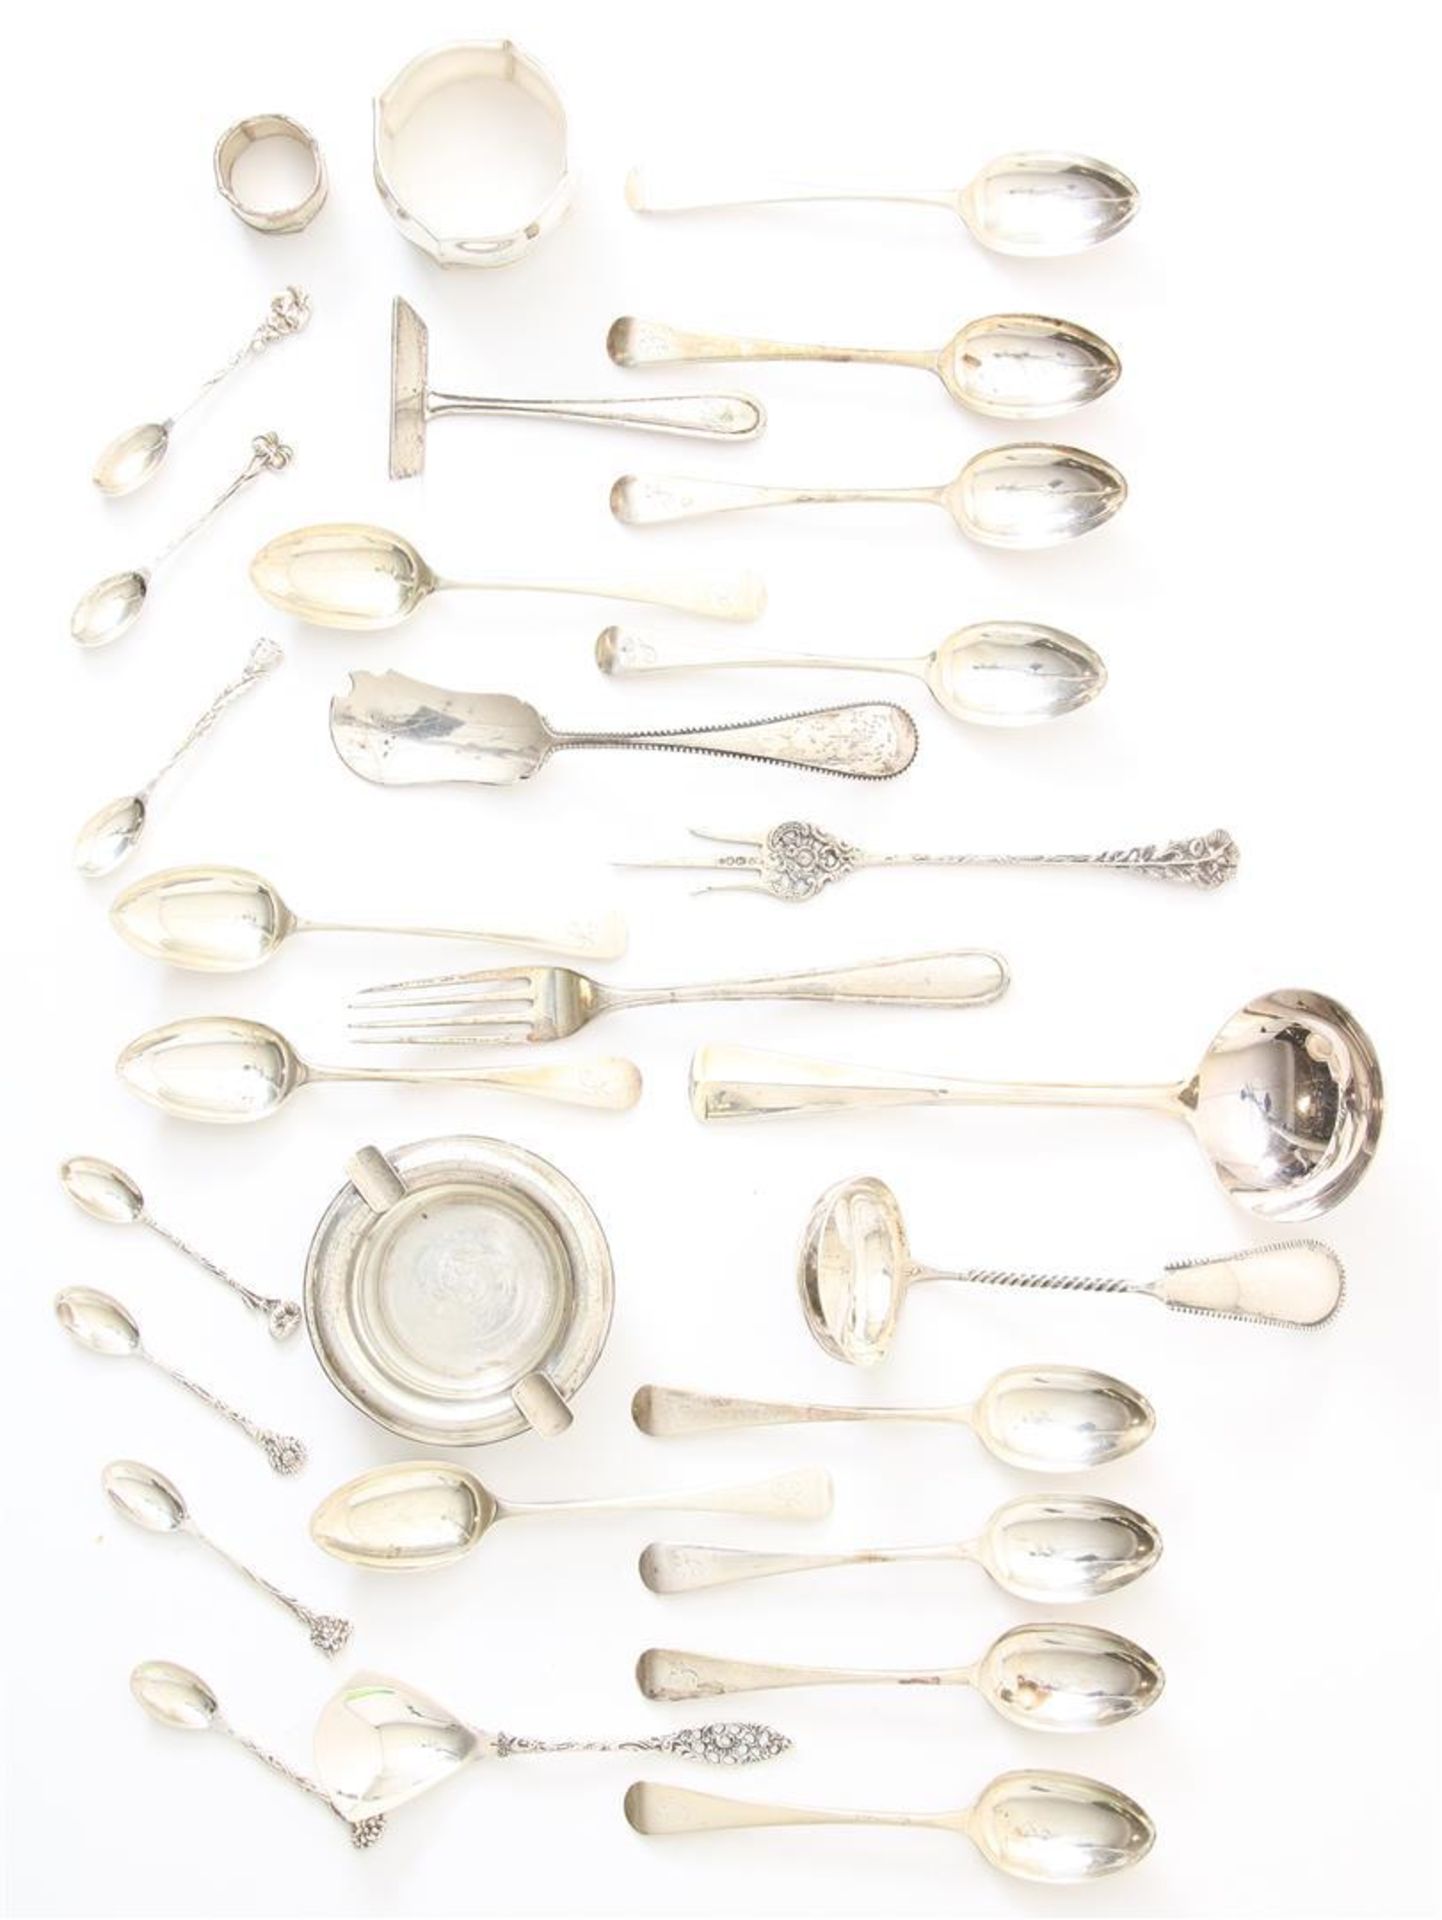 Lot of silverware and cutlery including coffee spoons, sauce spoon, napkin ring, ashtray of